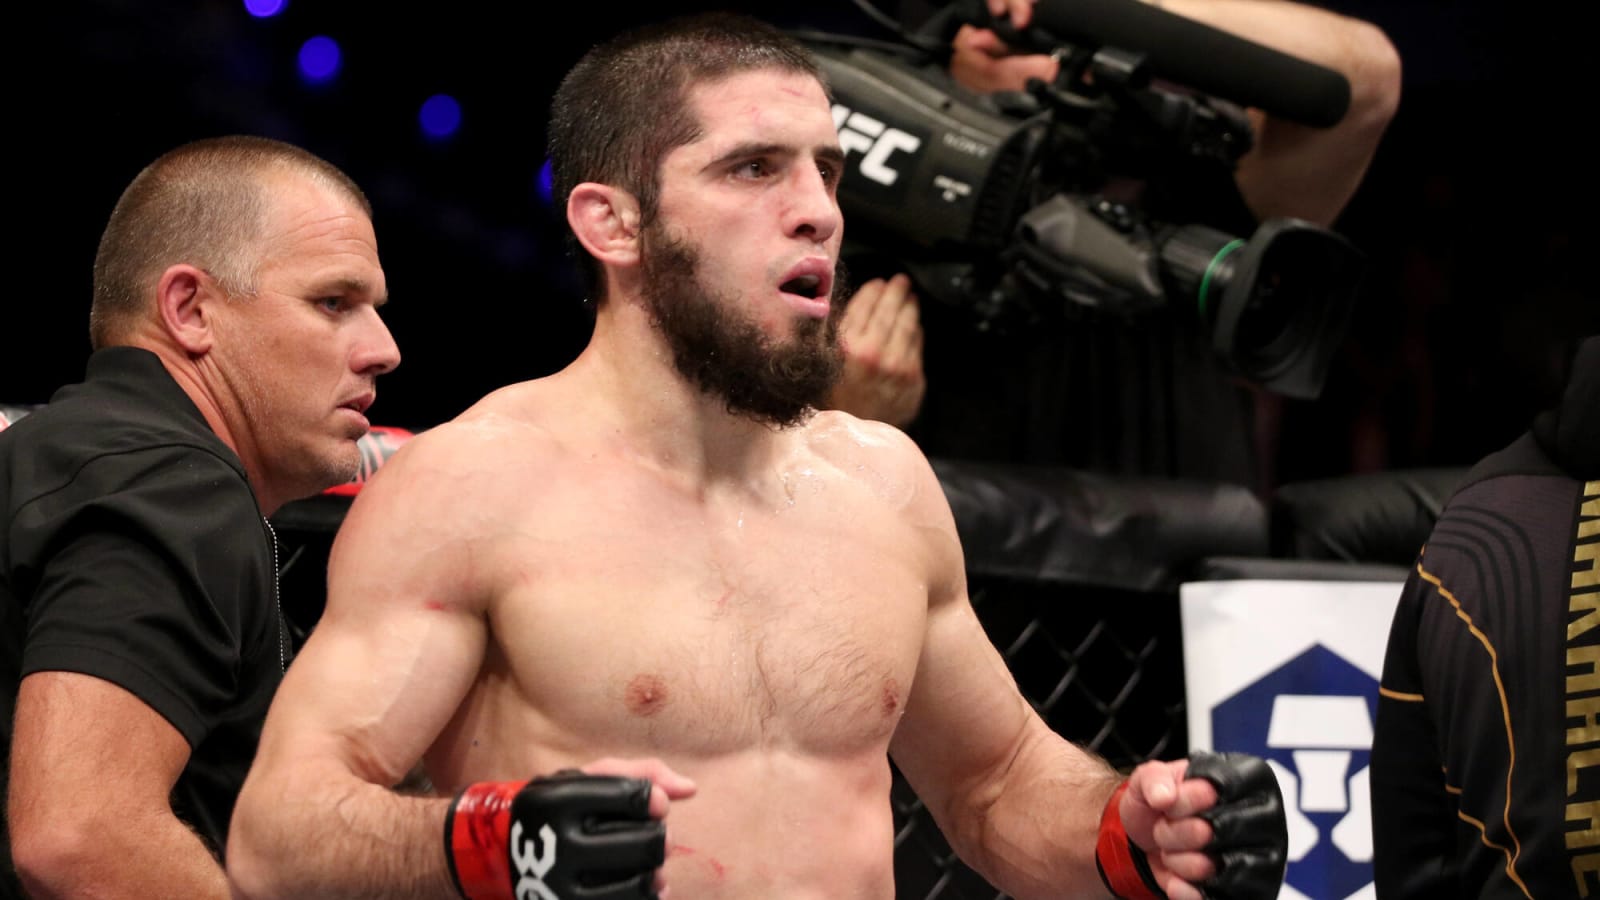 Watch: Islam Makhachev hilariously ‘loses’ to UFC Hall of Famer’s son ahead of title defense against Dustin Poirier